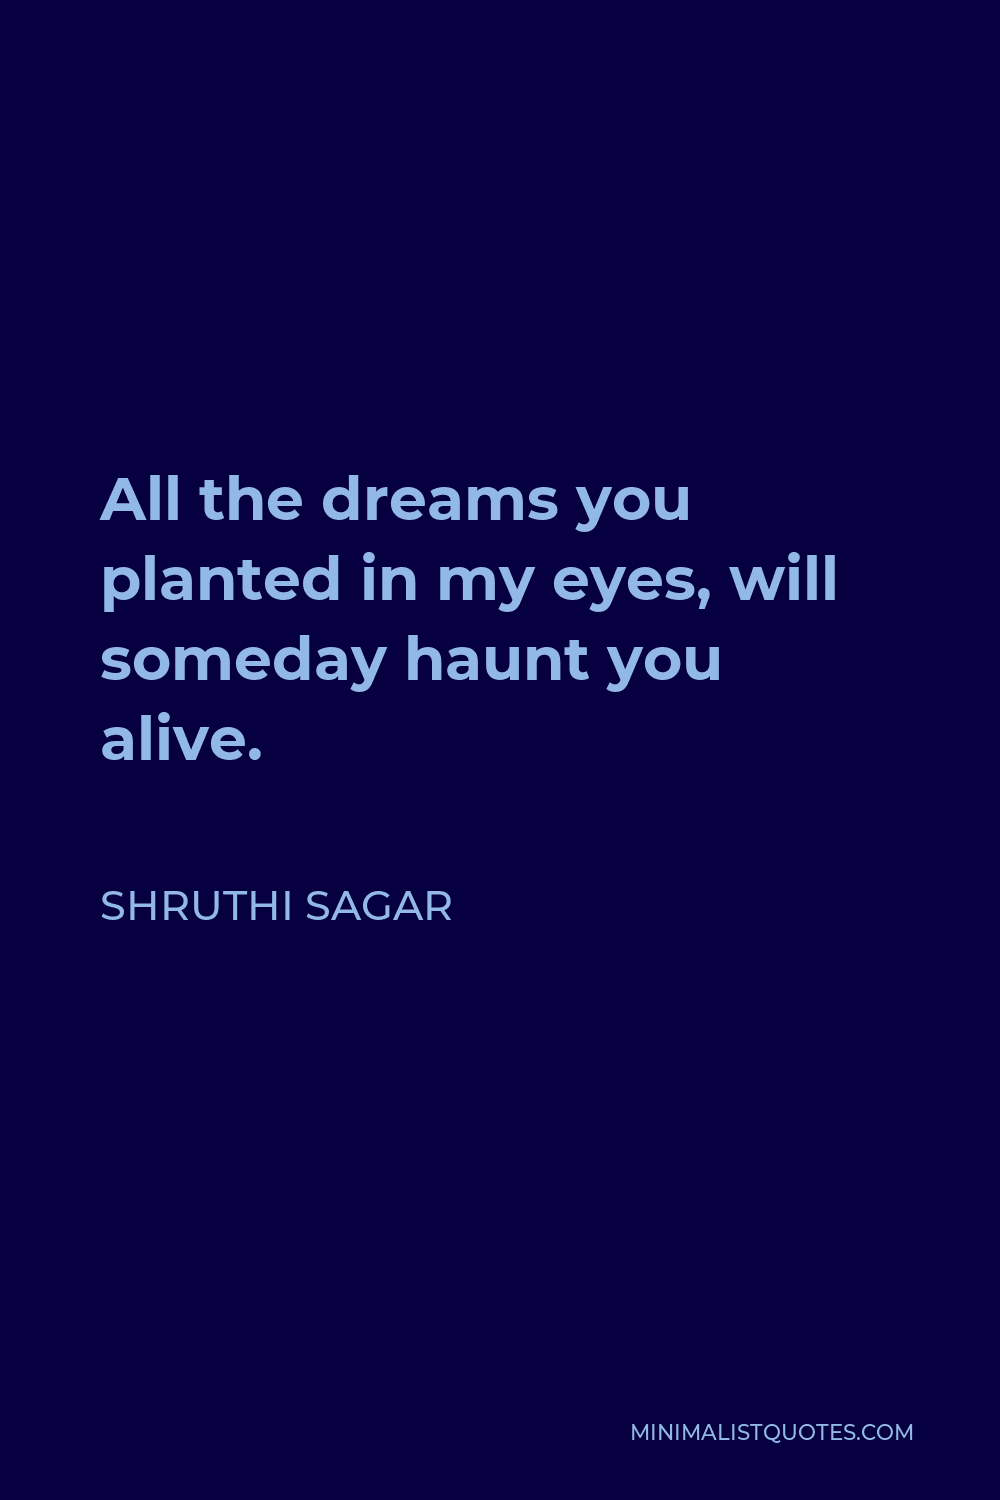 Shruthi Sagar Quote - All the dreams you planted in my eyes, will someday haunt you alive.